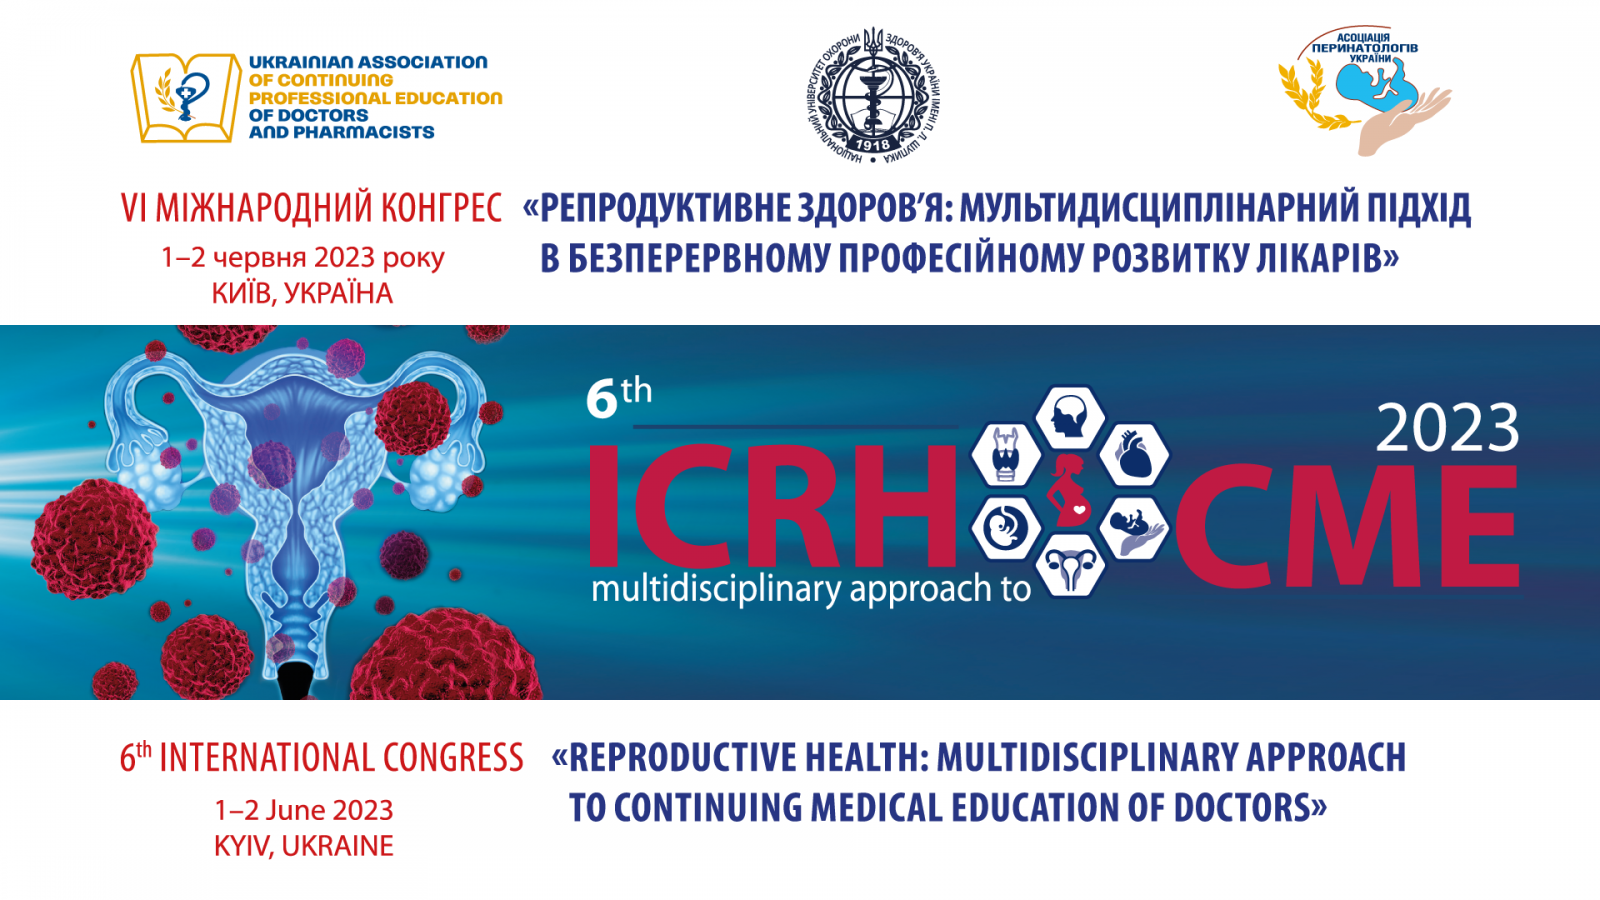 VI INTERNATIONAL CONGRESS REPRODUCTIVE HEALTH: a multidisciplinary approach in the continuing professional development of physicians